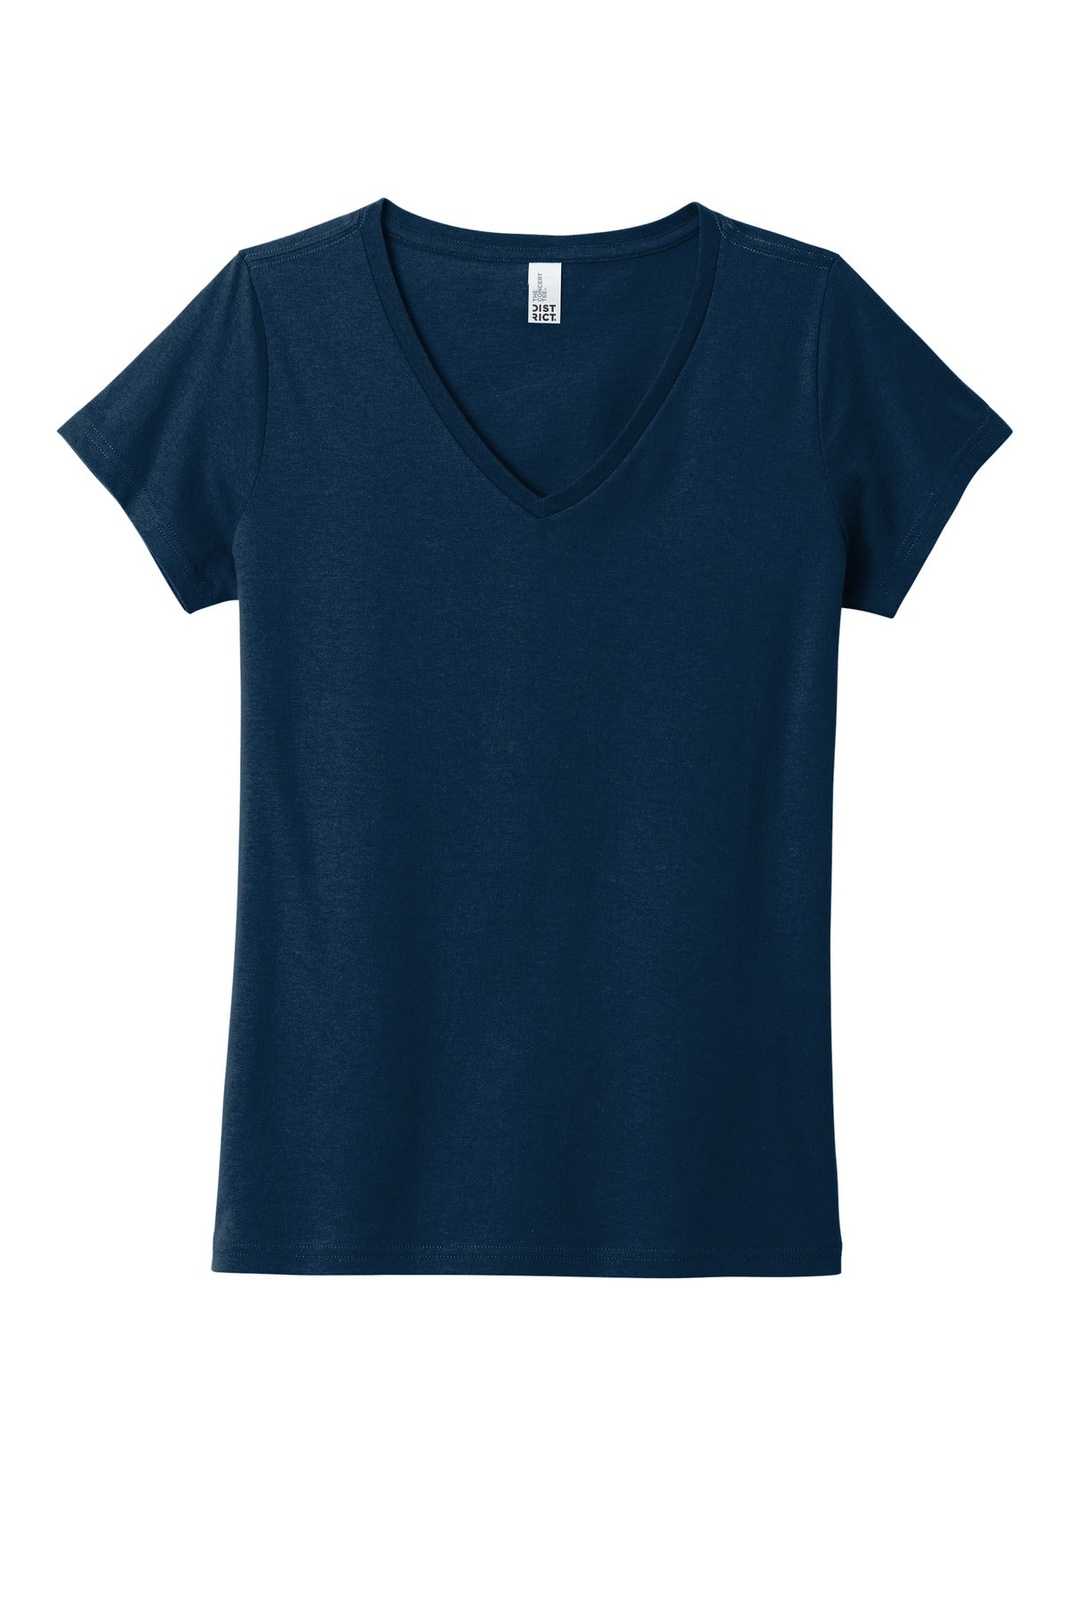 District DT5002 Women's The Concert Tee V-Neck - New Navy - HIT a Double - 1